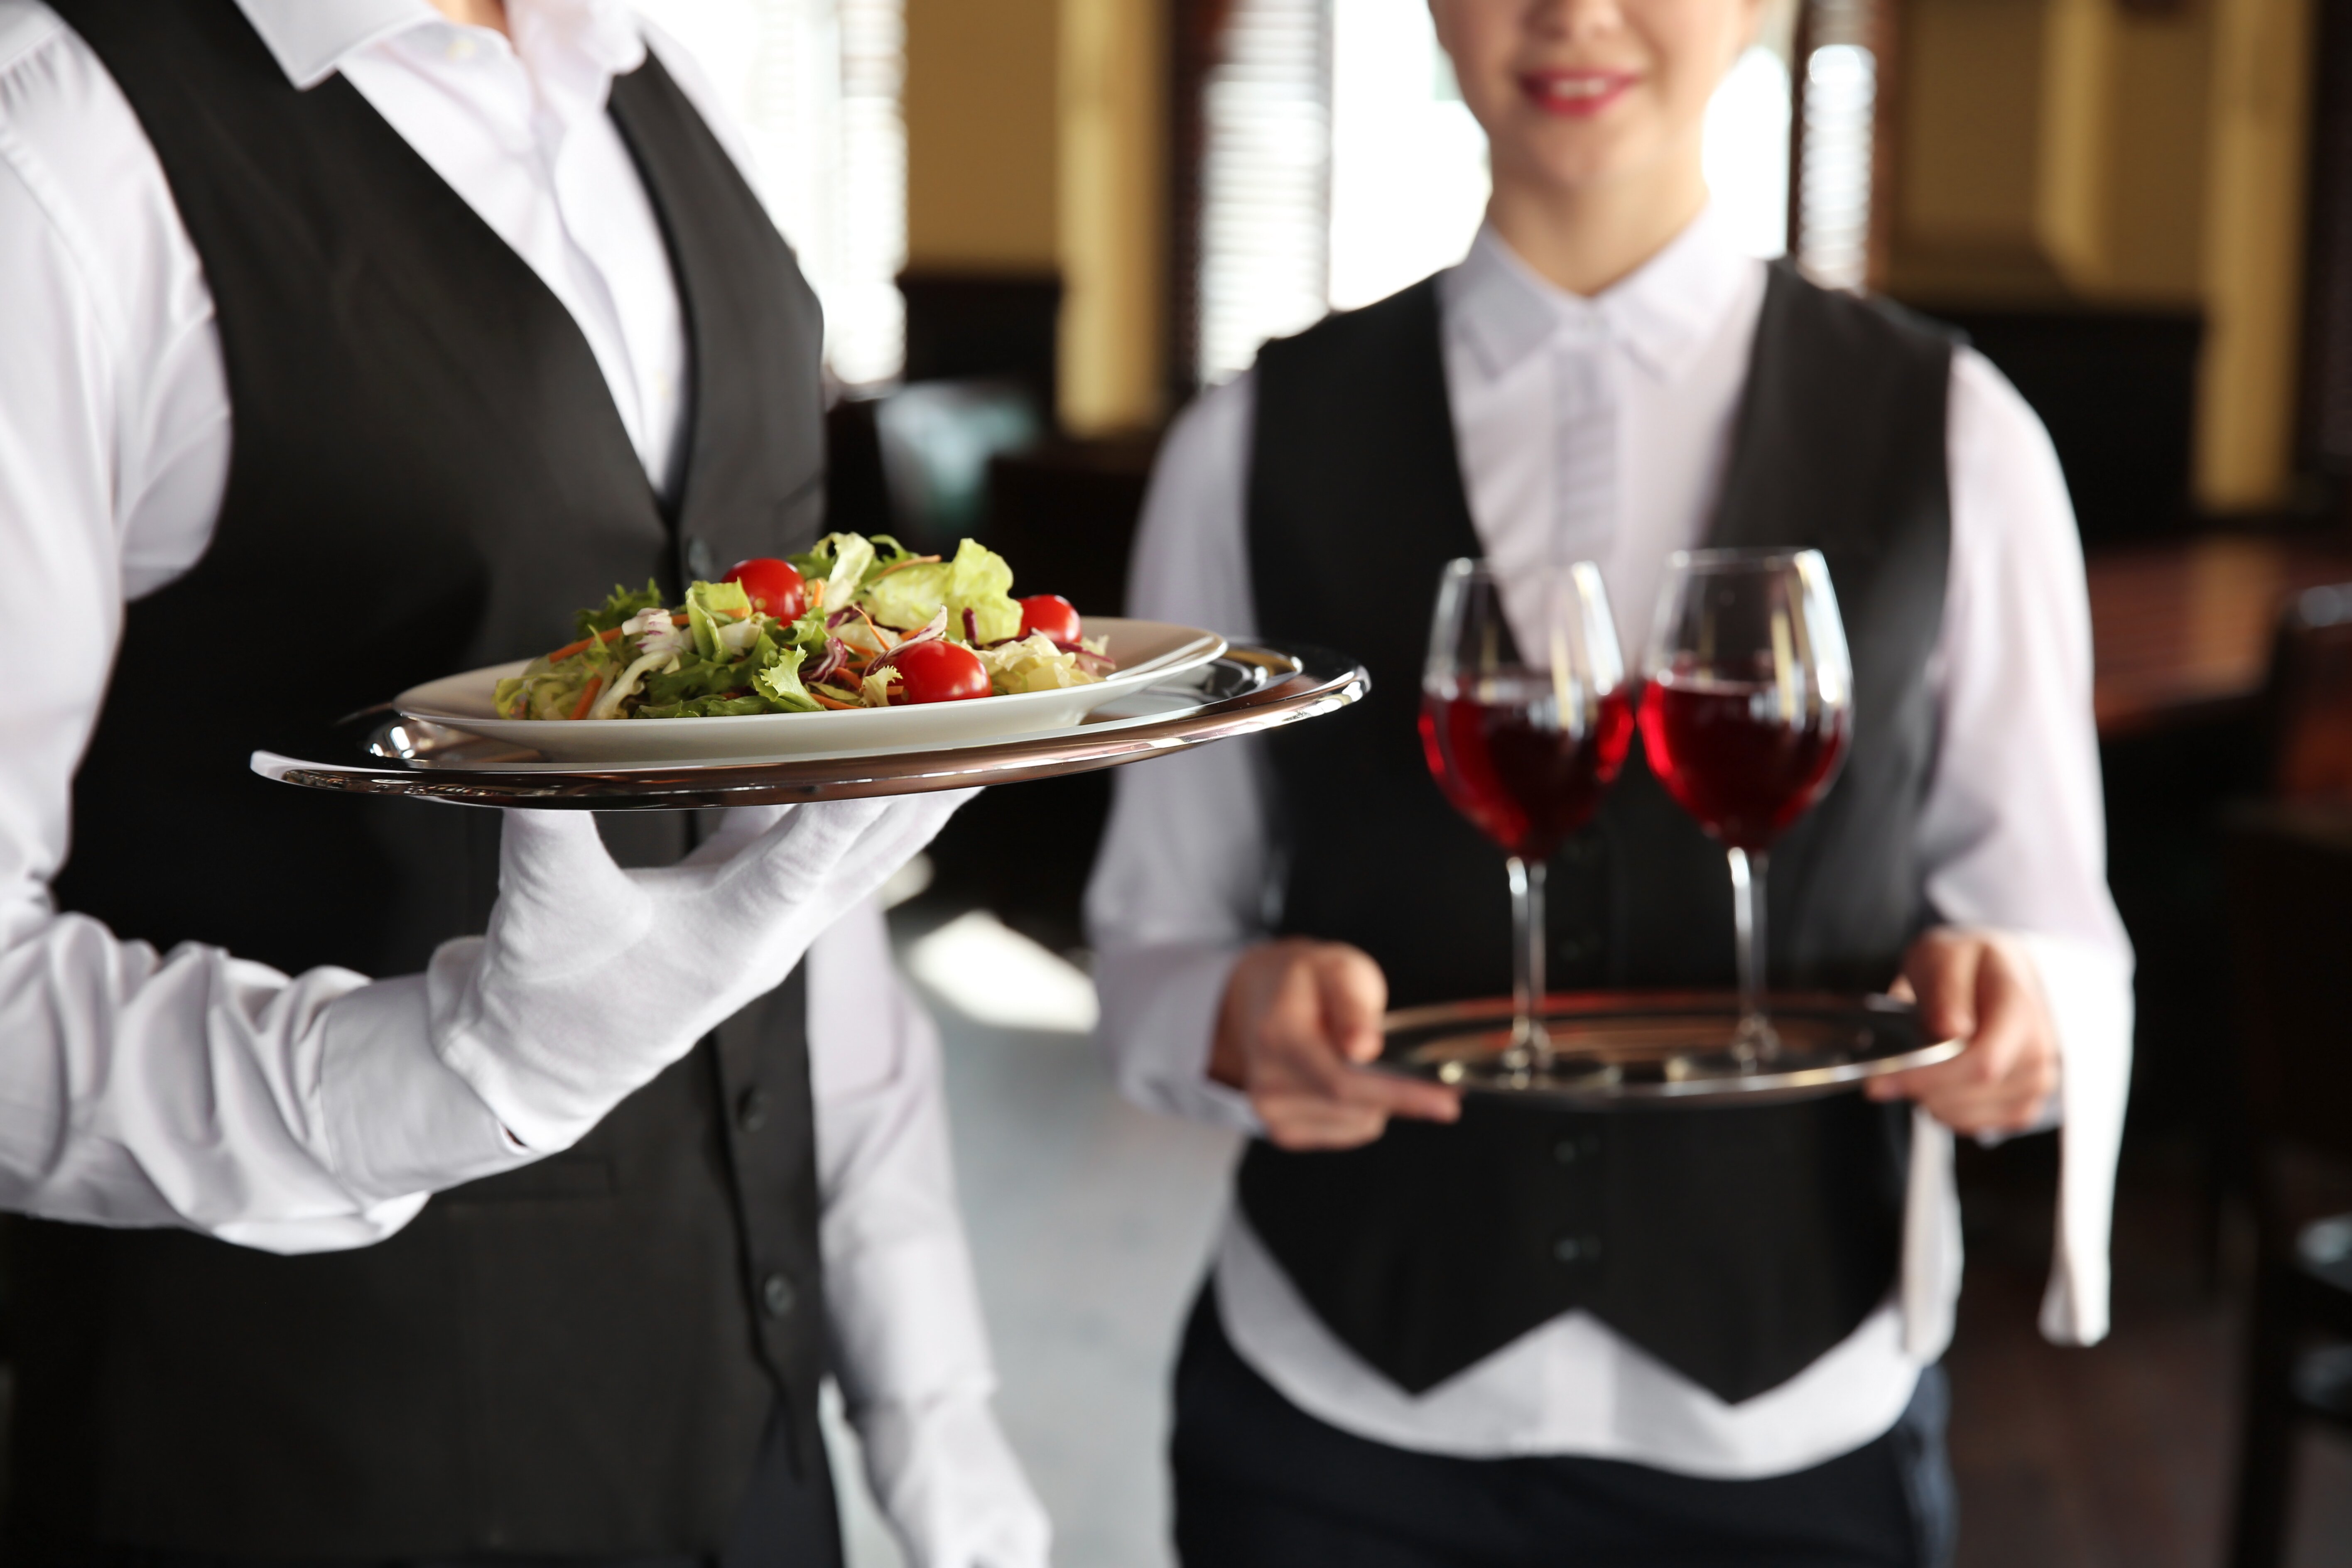 Government-backed hospitality jobs scheme launches in Wales